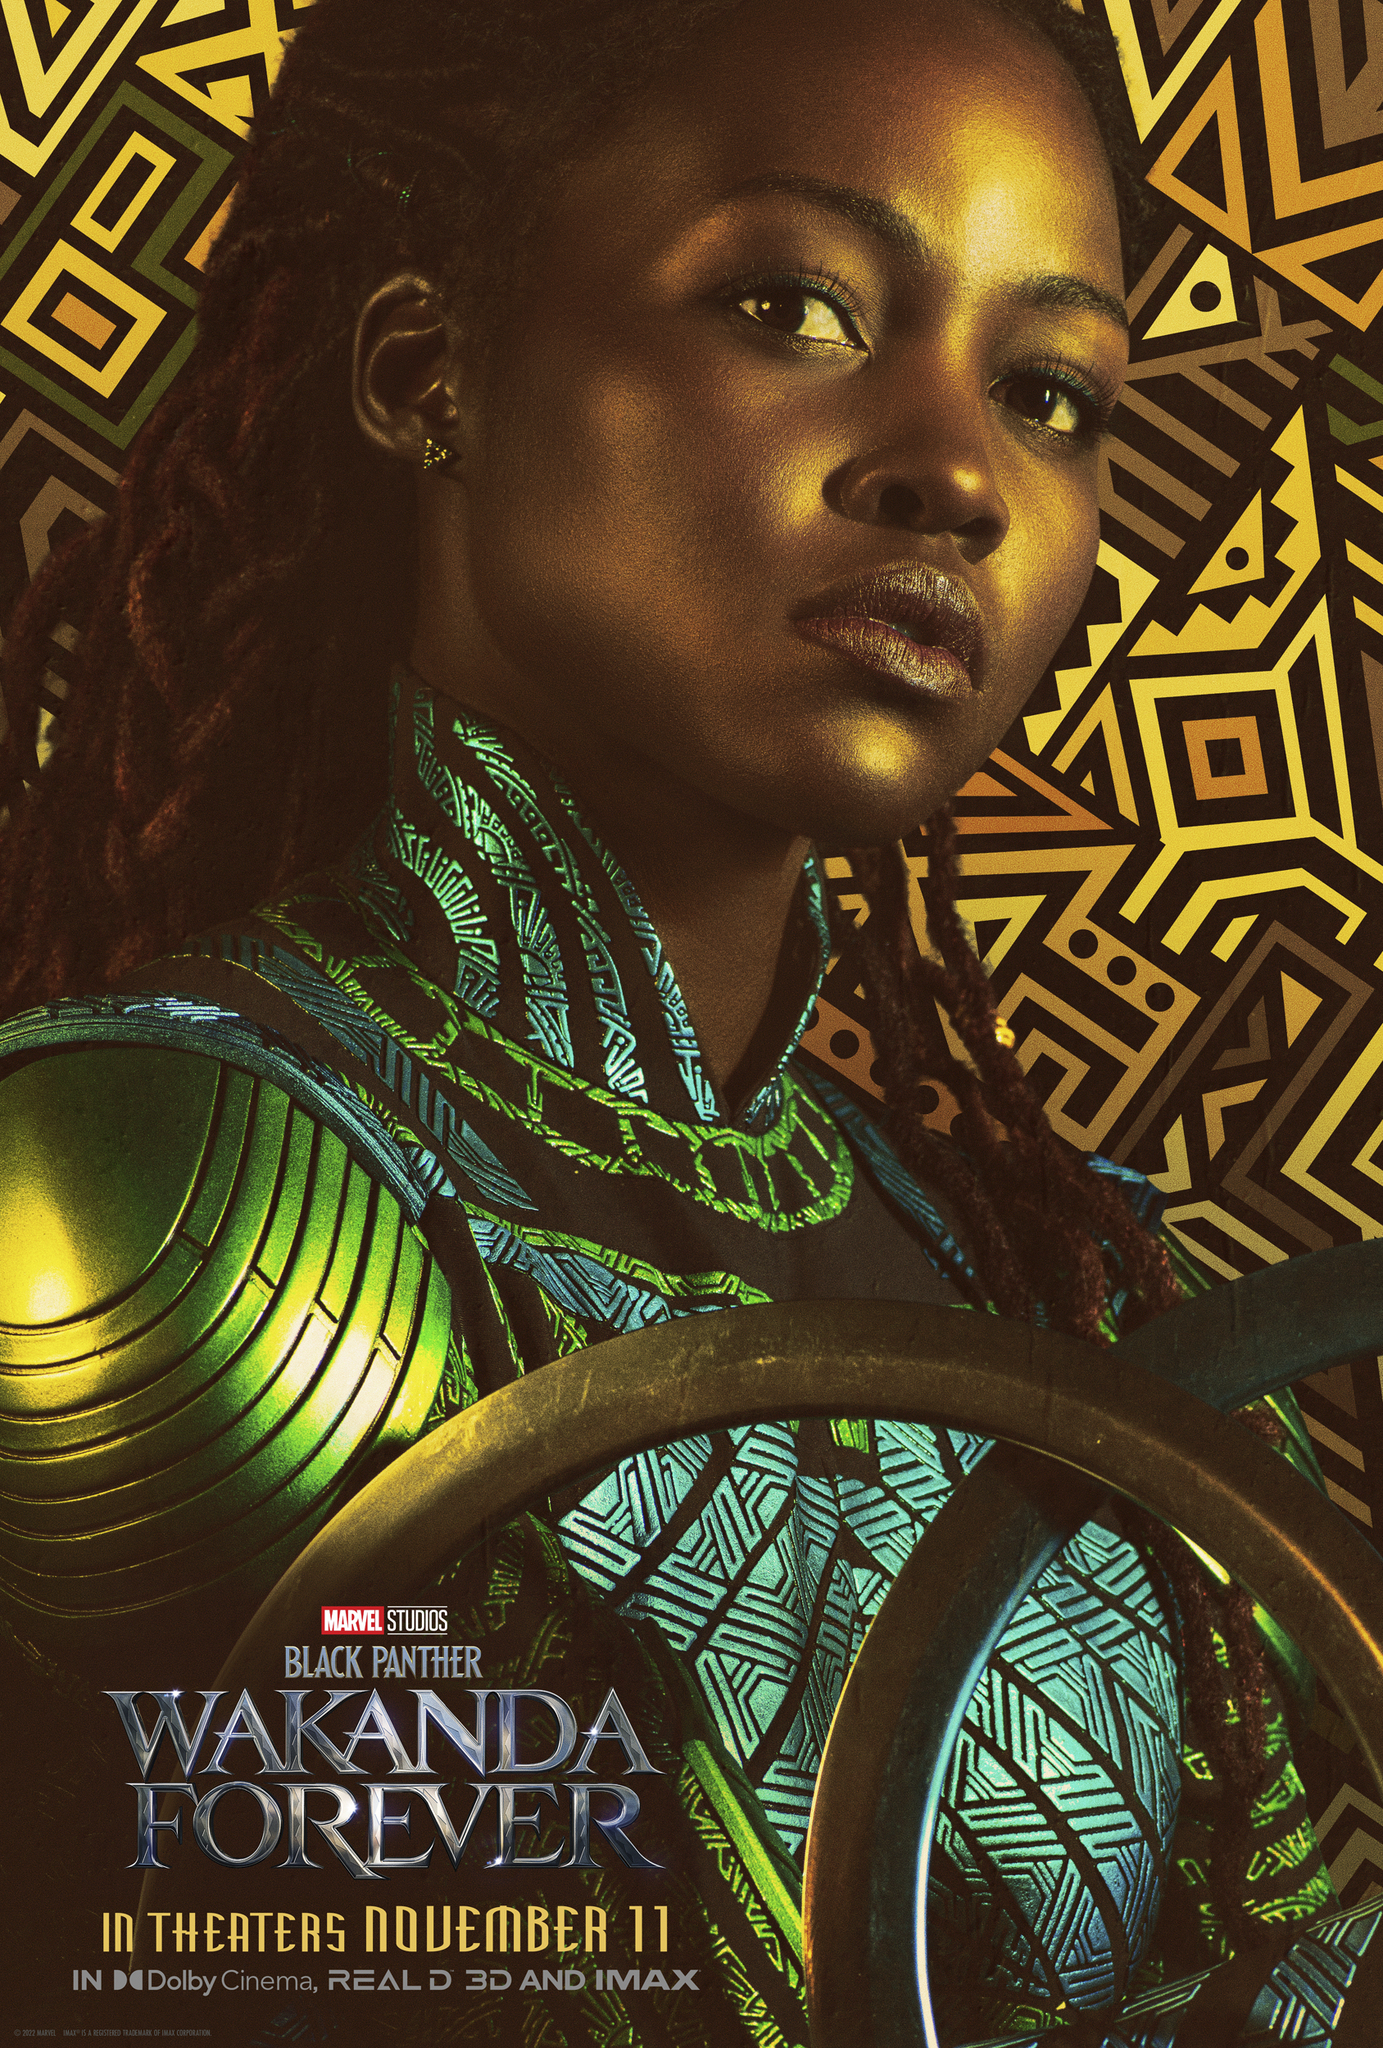 Black Panther: Wakanda Forever Character Posters